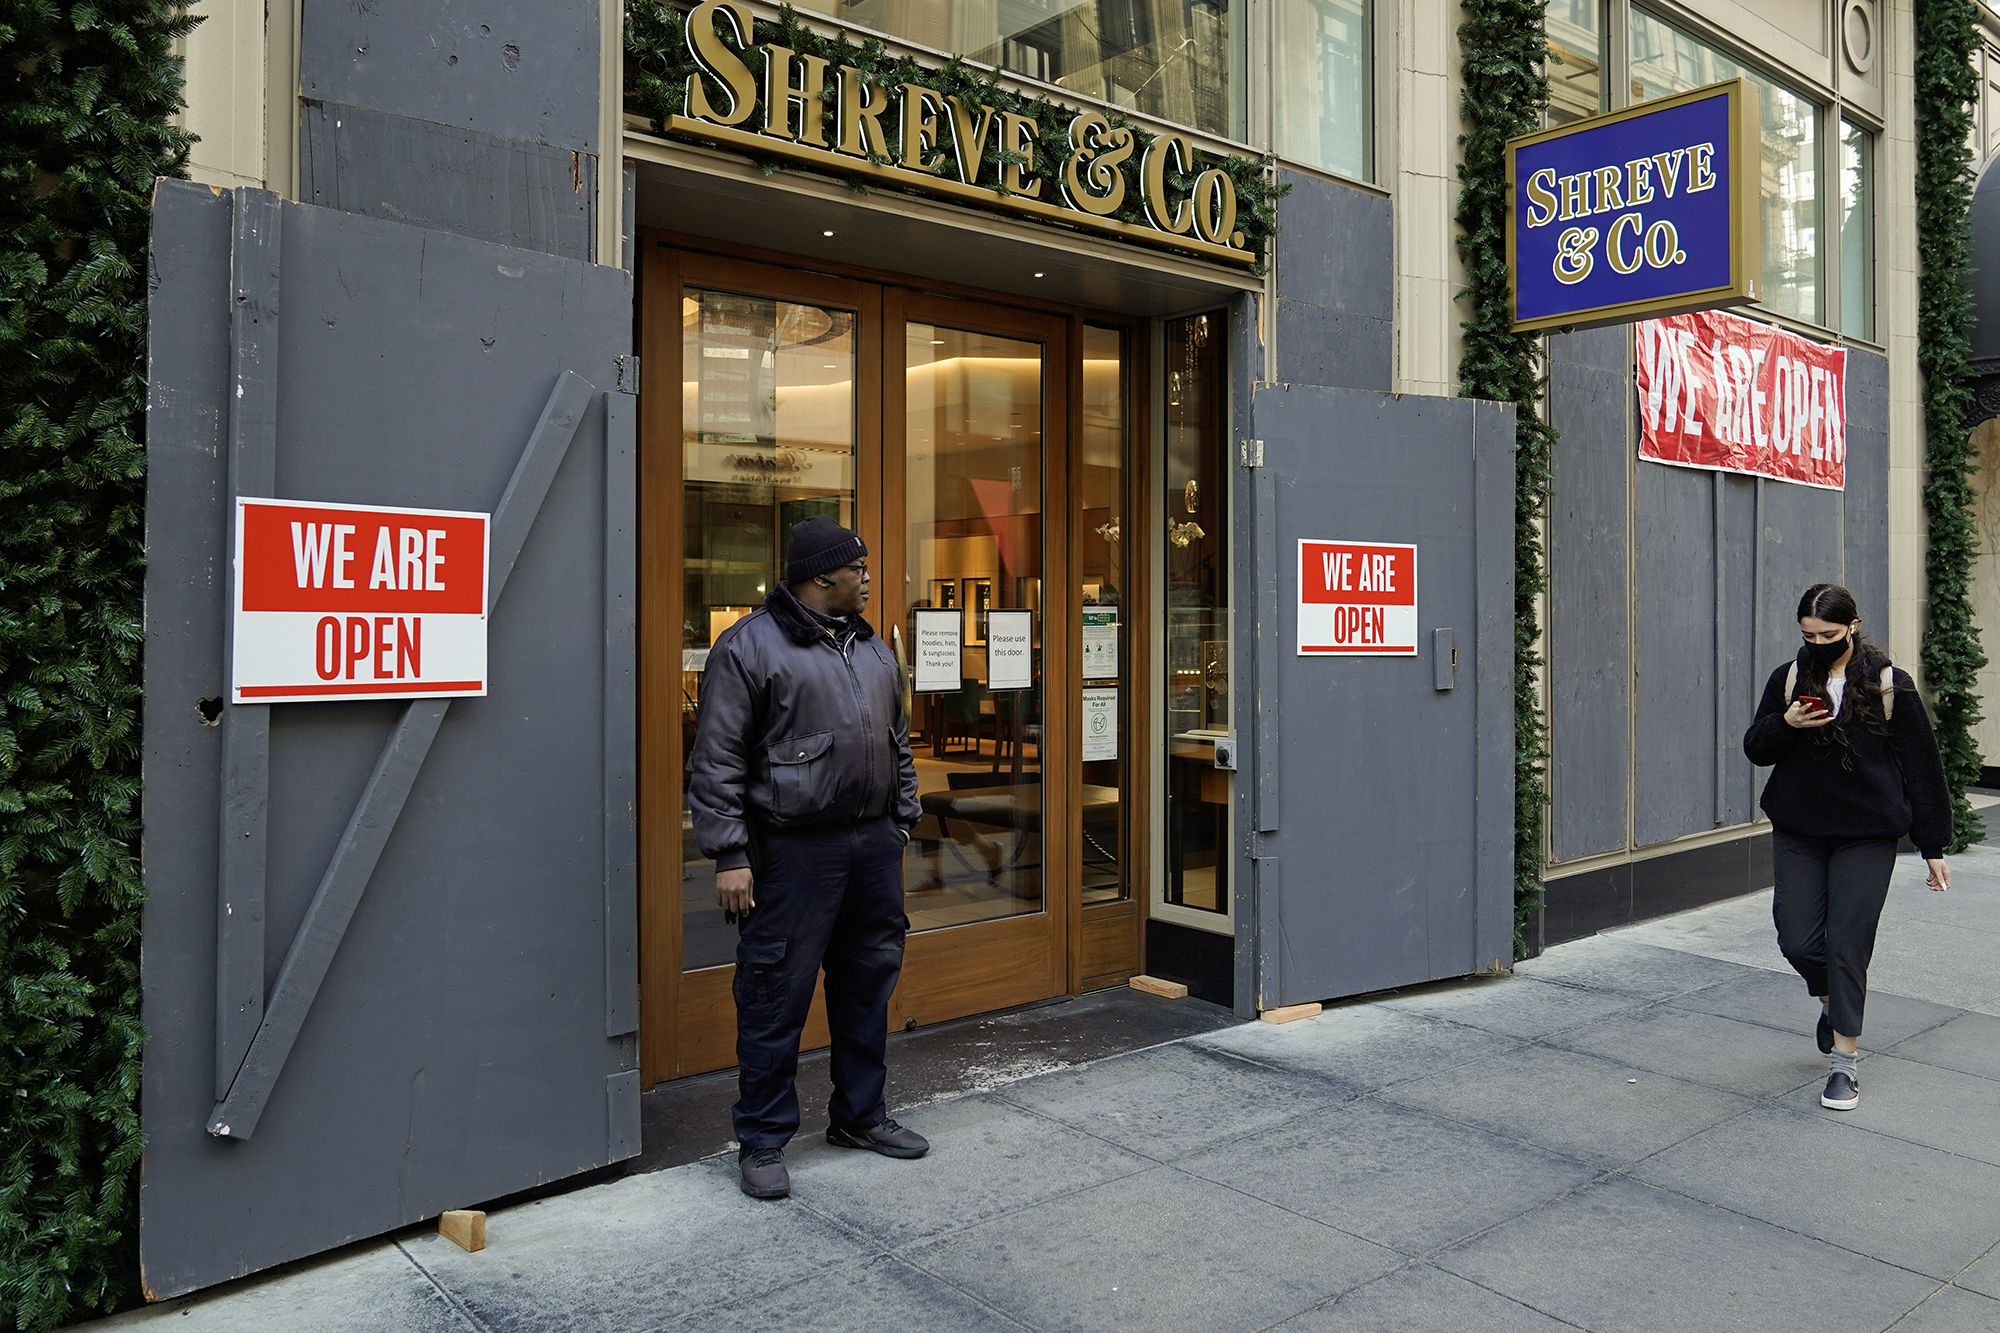 A security guard stands outside the heavily boarded Shreve & Co. jewelry store in San Francisco on Dec. 2, 2021. Photo by Eric Risberg, AP Photo